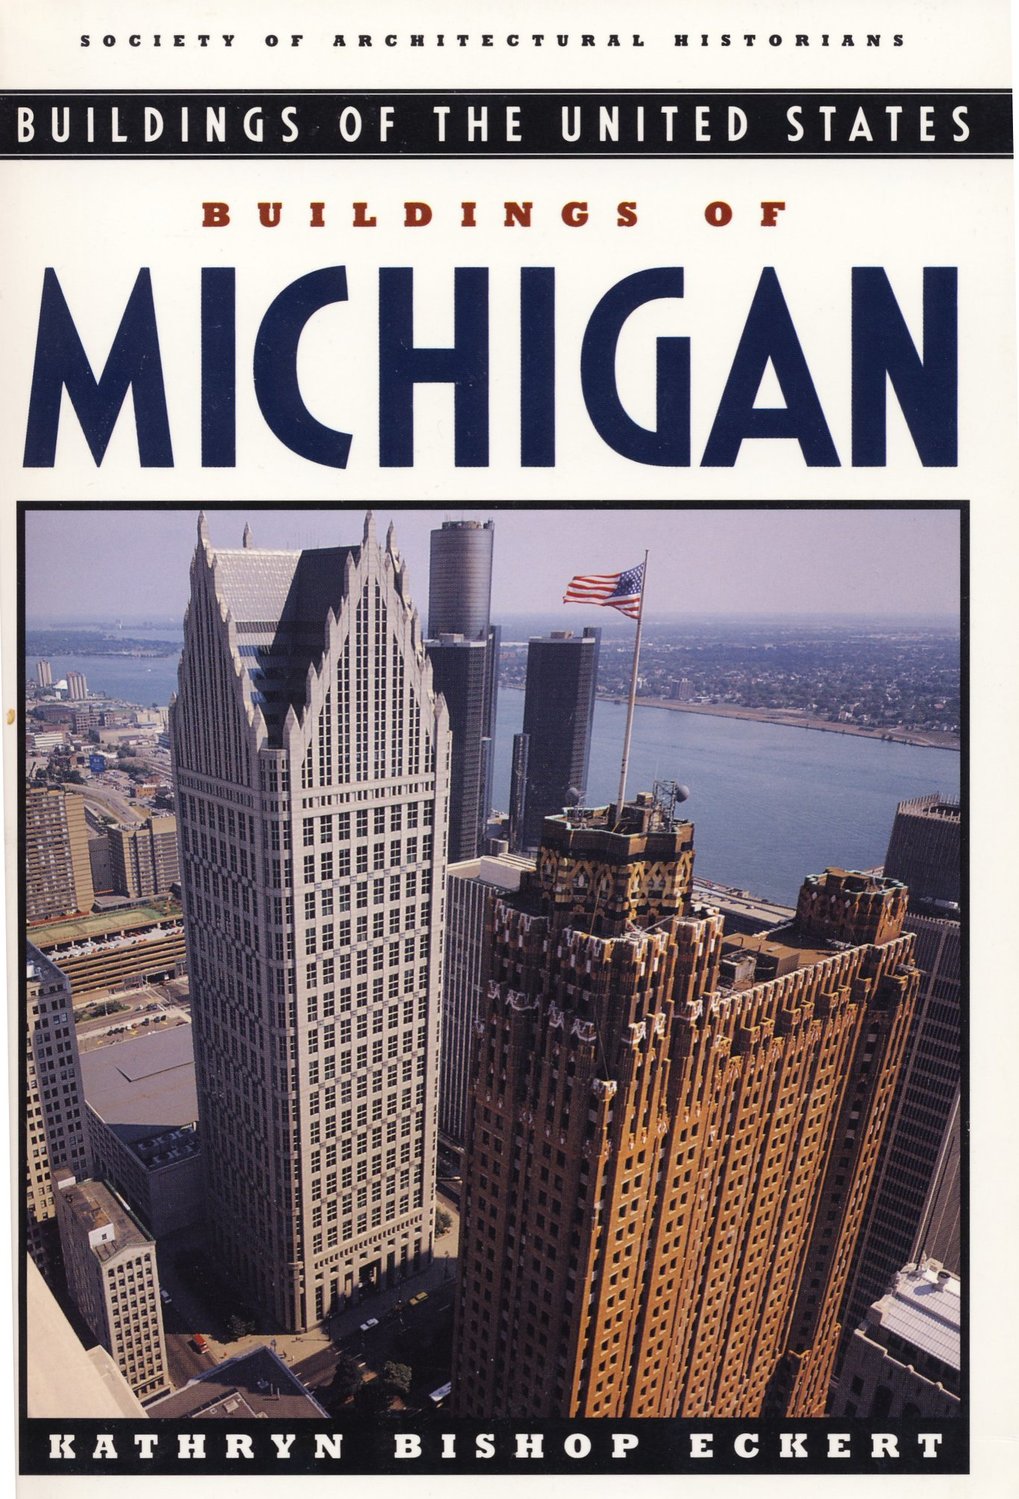 "The Buildings of Michigan" was first published in 1993